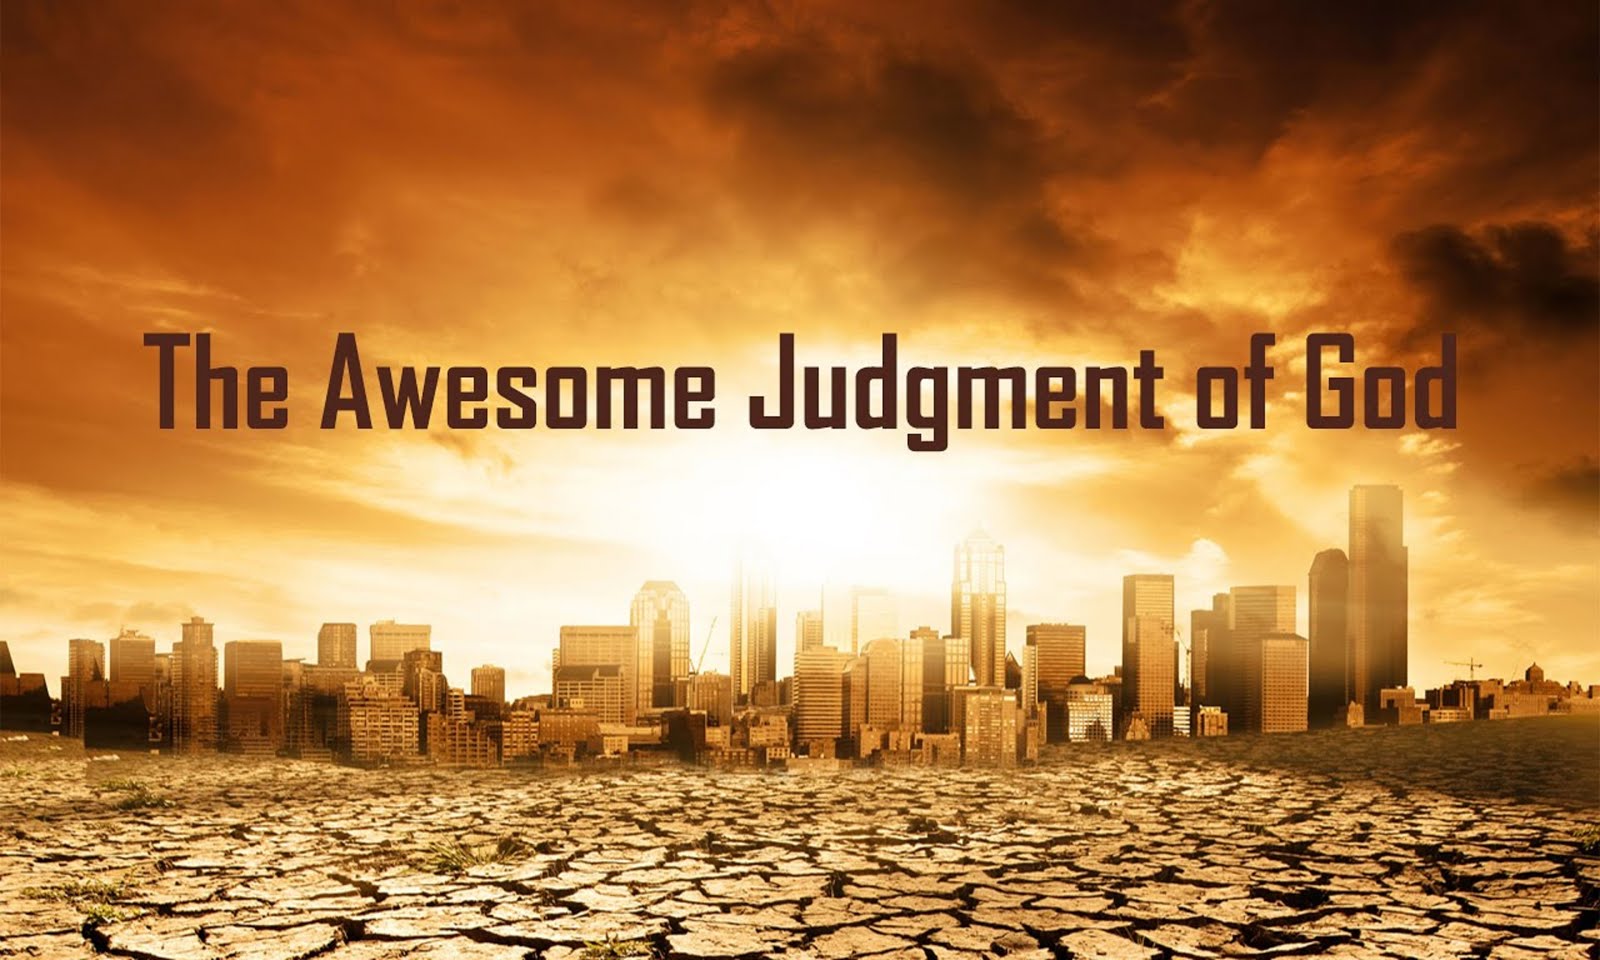 THE AWESOME JUDGEMENT OF GOD